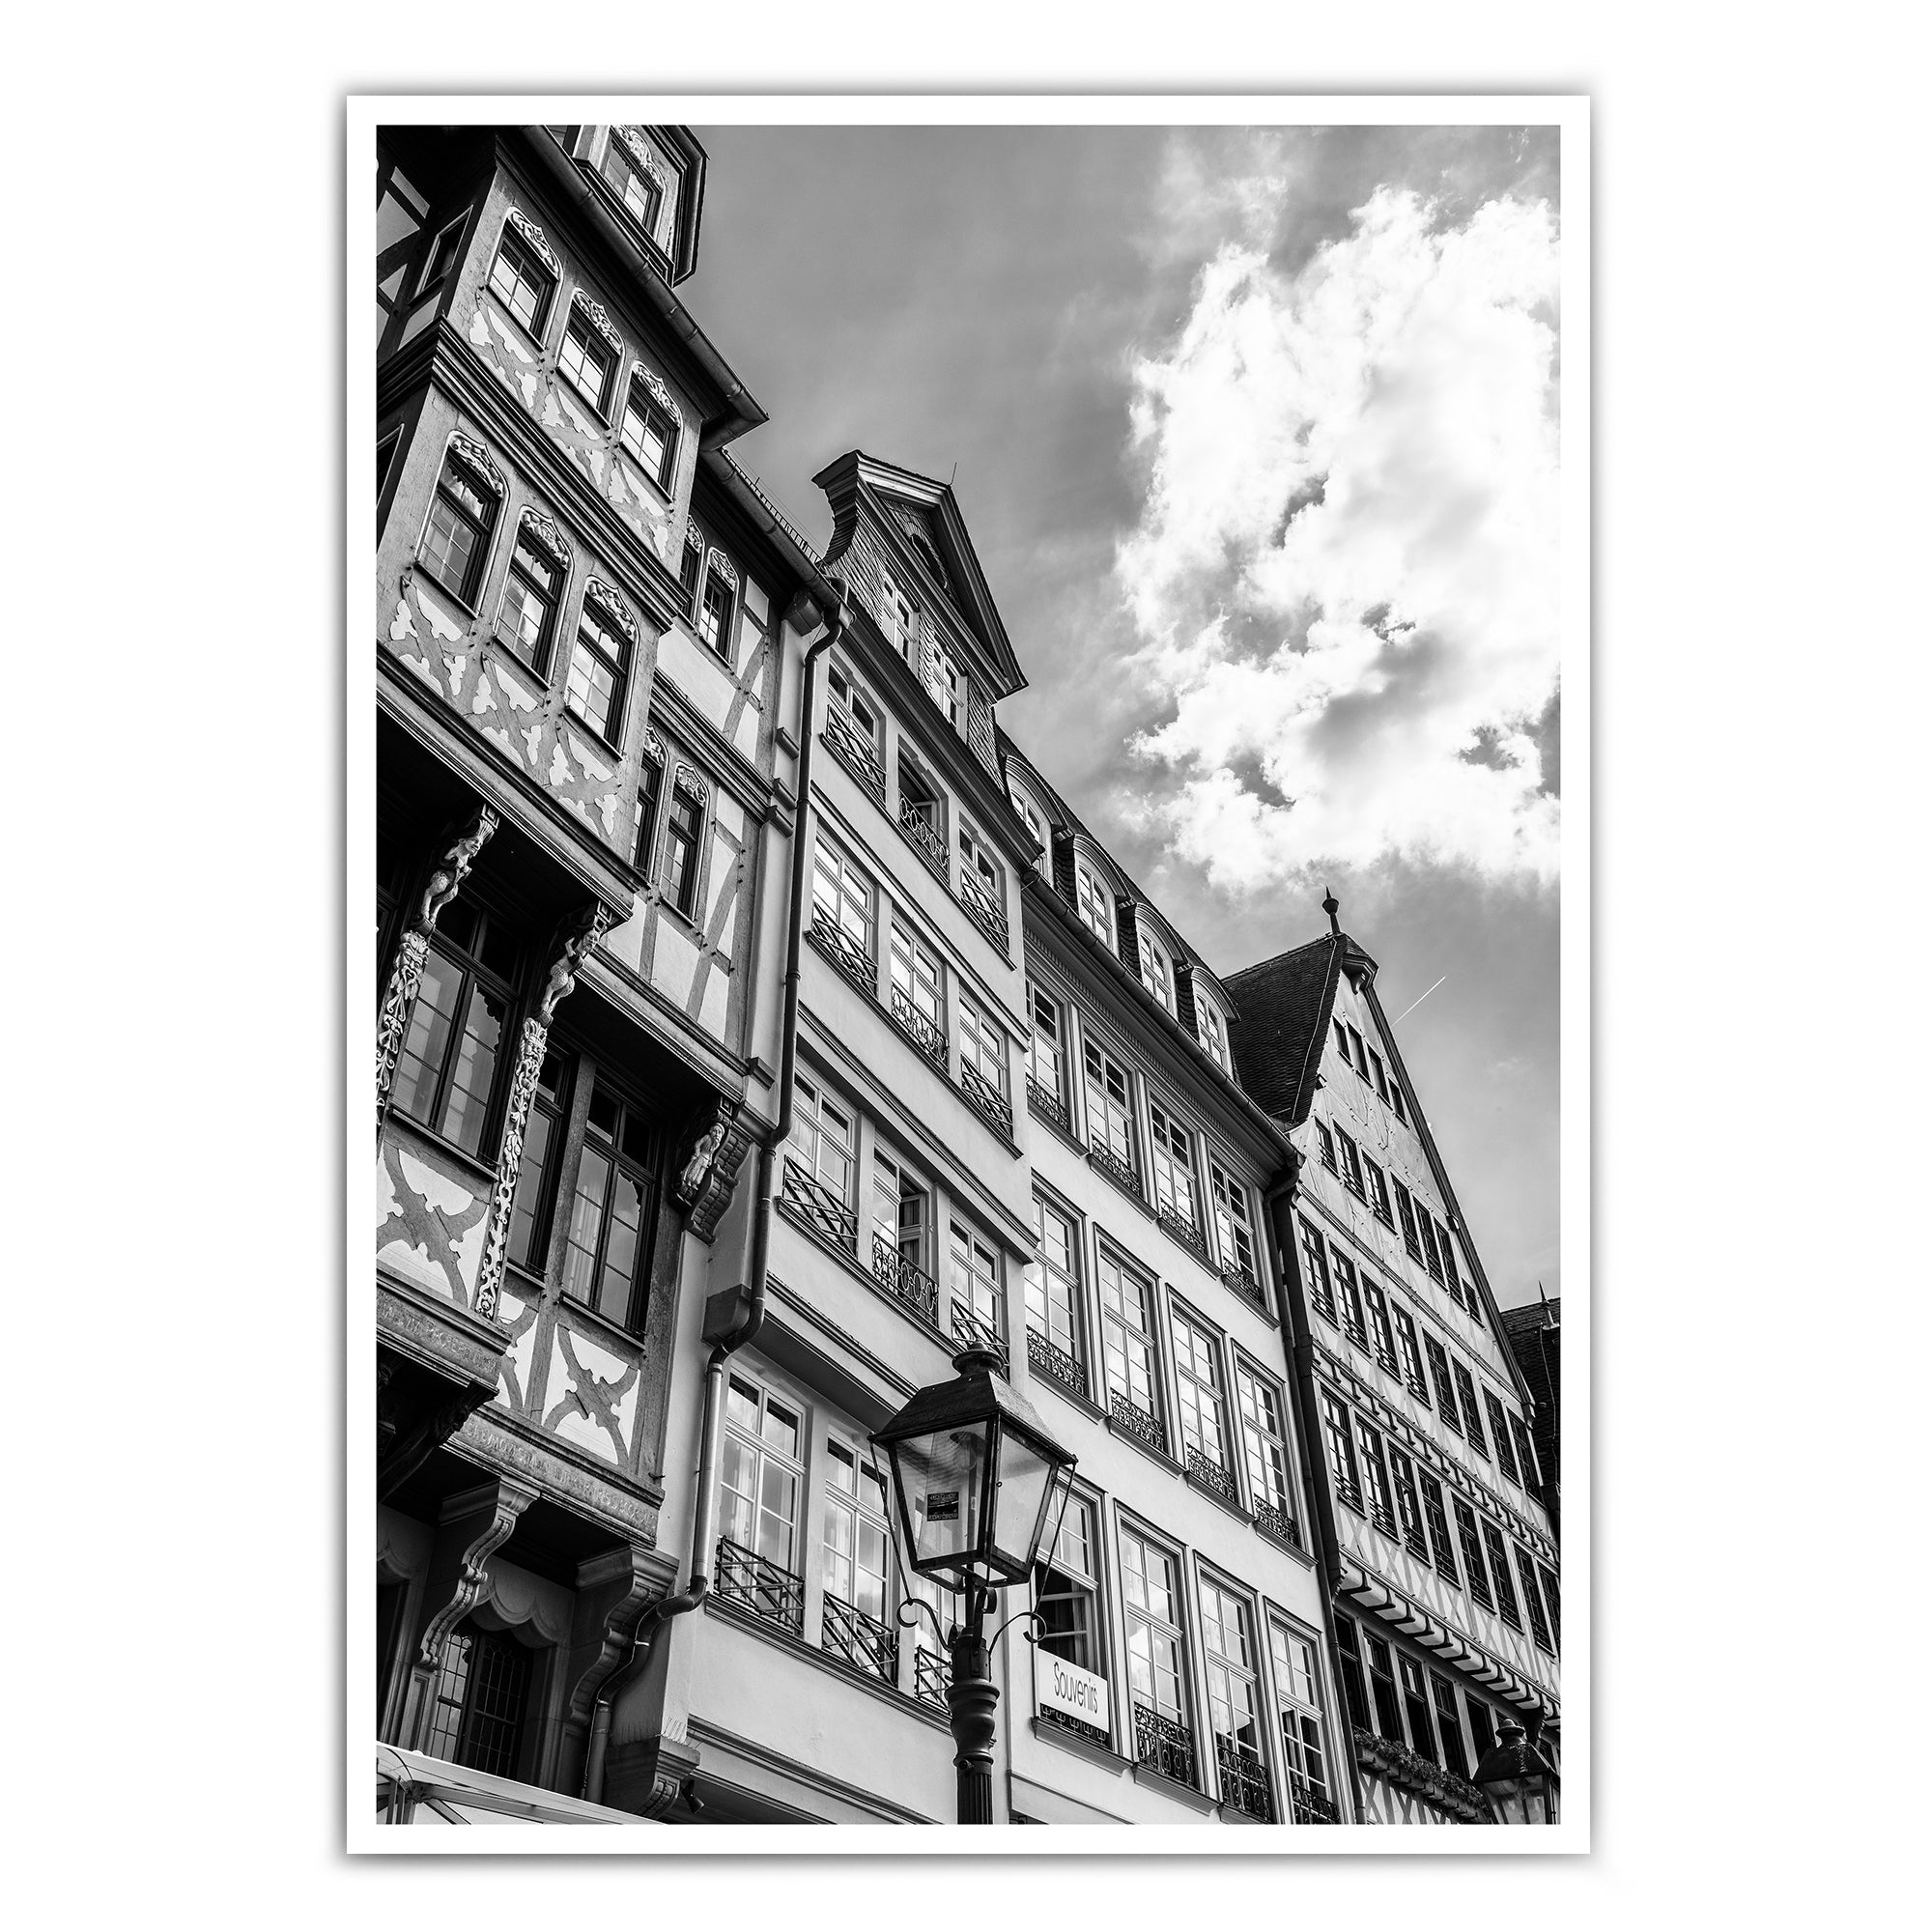 4one-pictures-frankfurt-am-main-poster-skyline-bild-ffm-kunstdruck-shop-5mm_411d724b-9983-4f4c-b4c6-8de56dc348b1.jpg